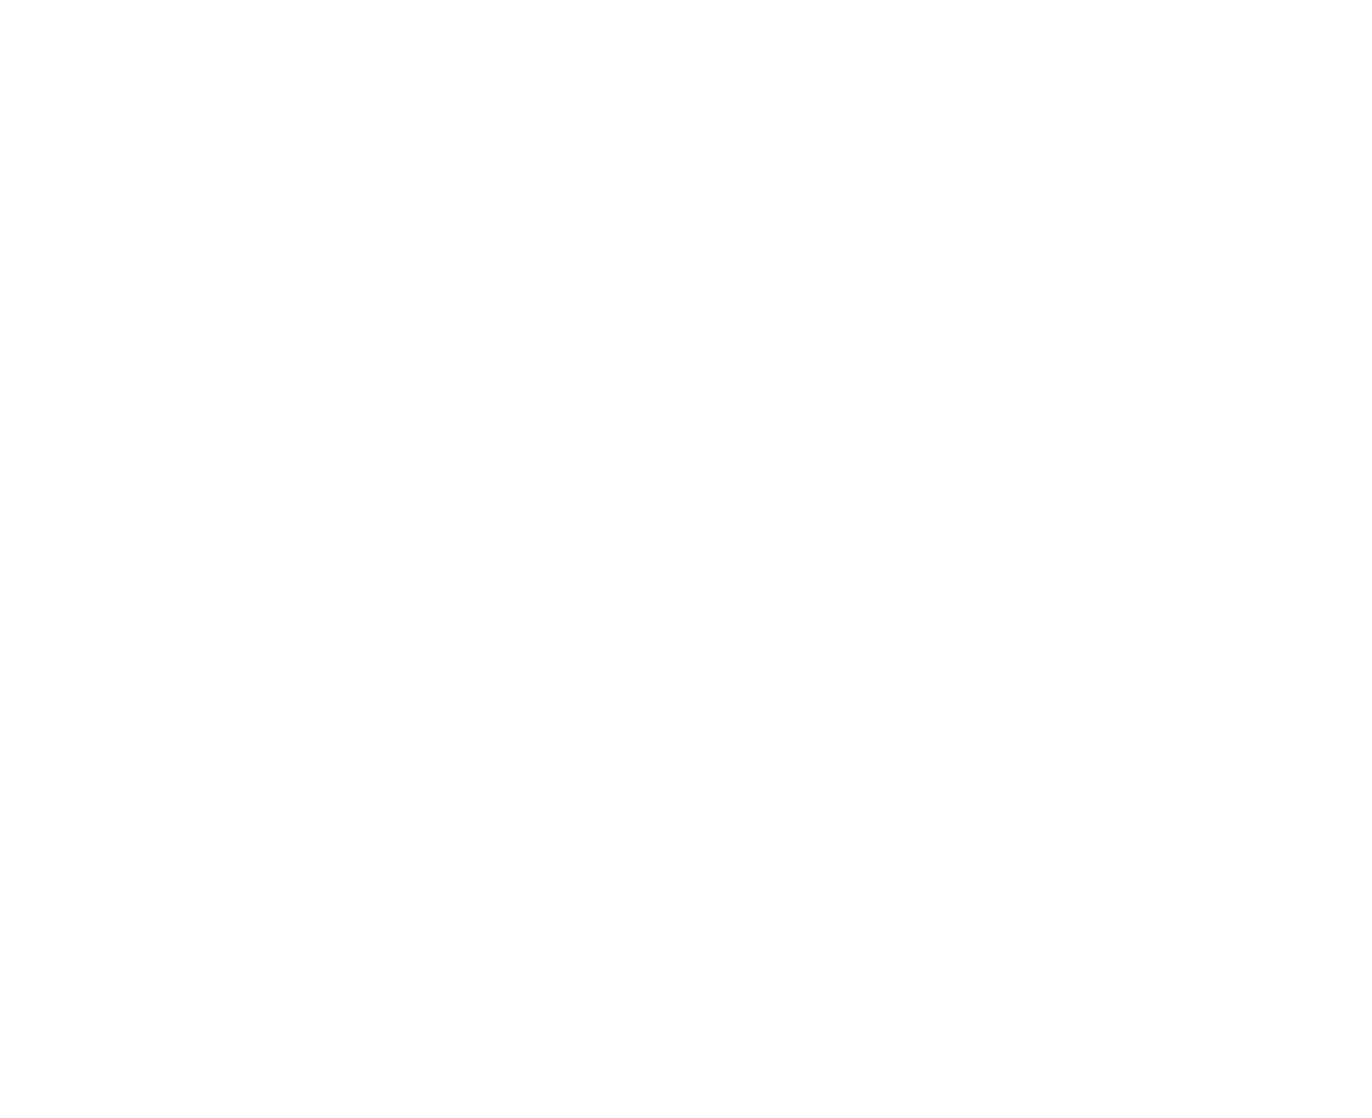 SoulForceOne Digital Marketing Services